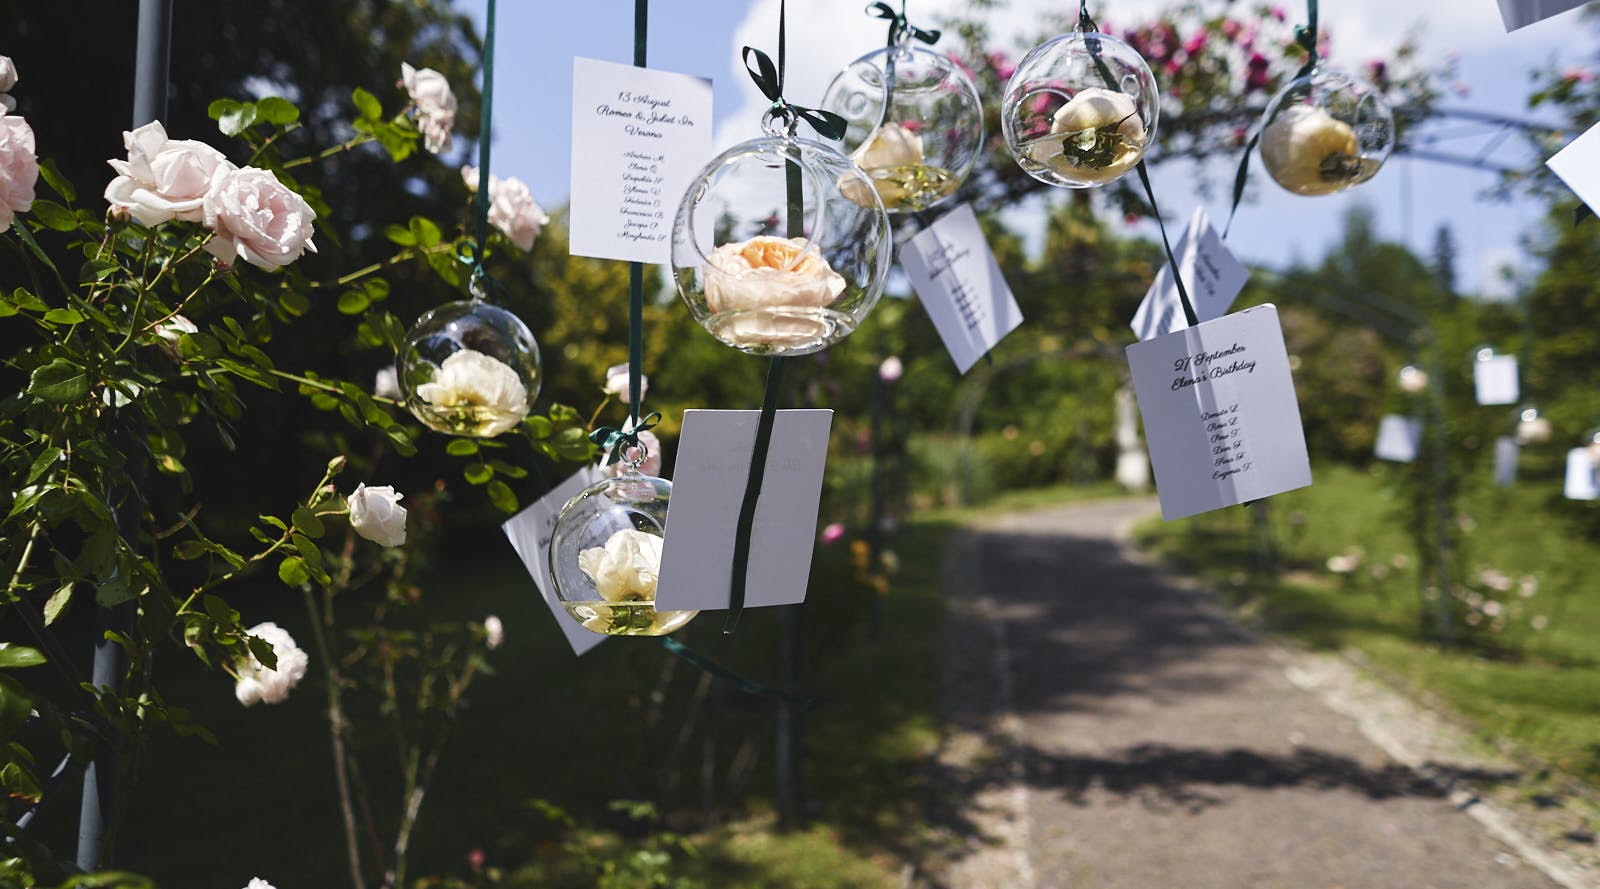 wedding decor on wedding day transparent glass balls with flowers and hanging notes